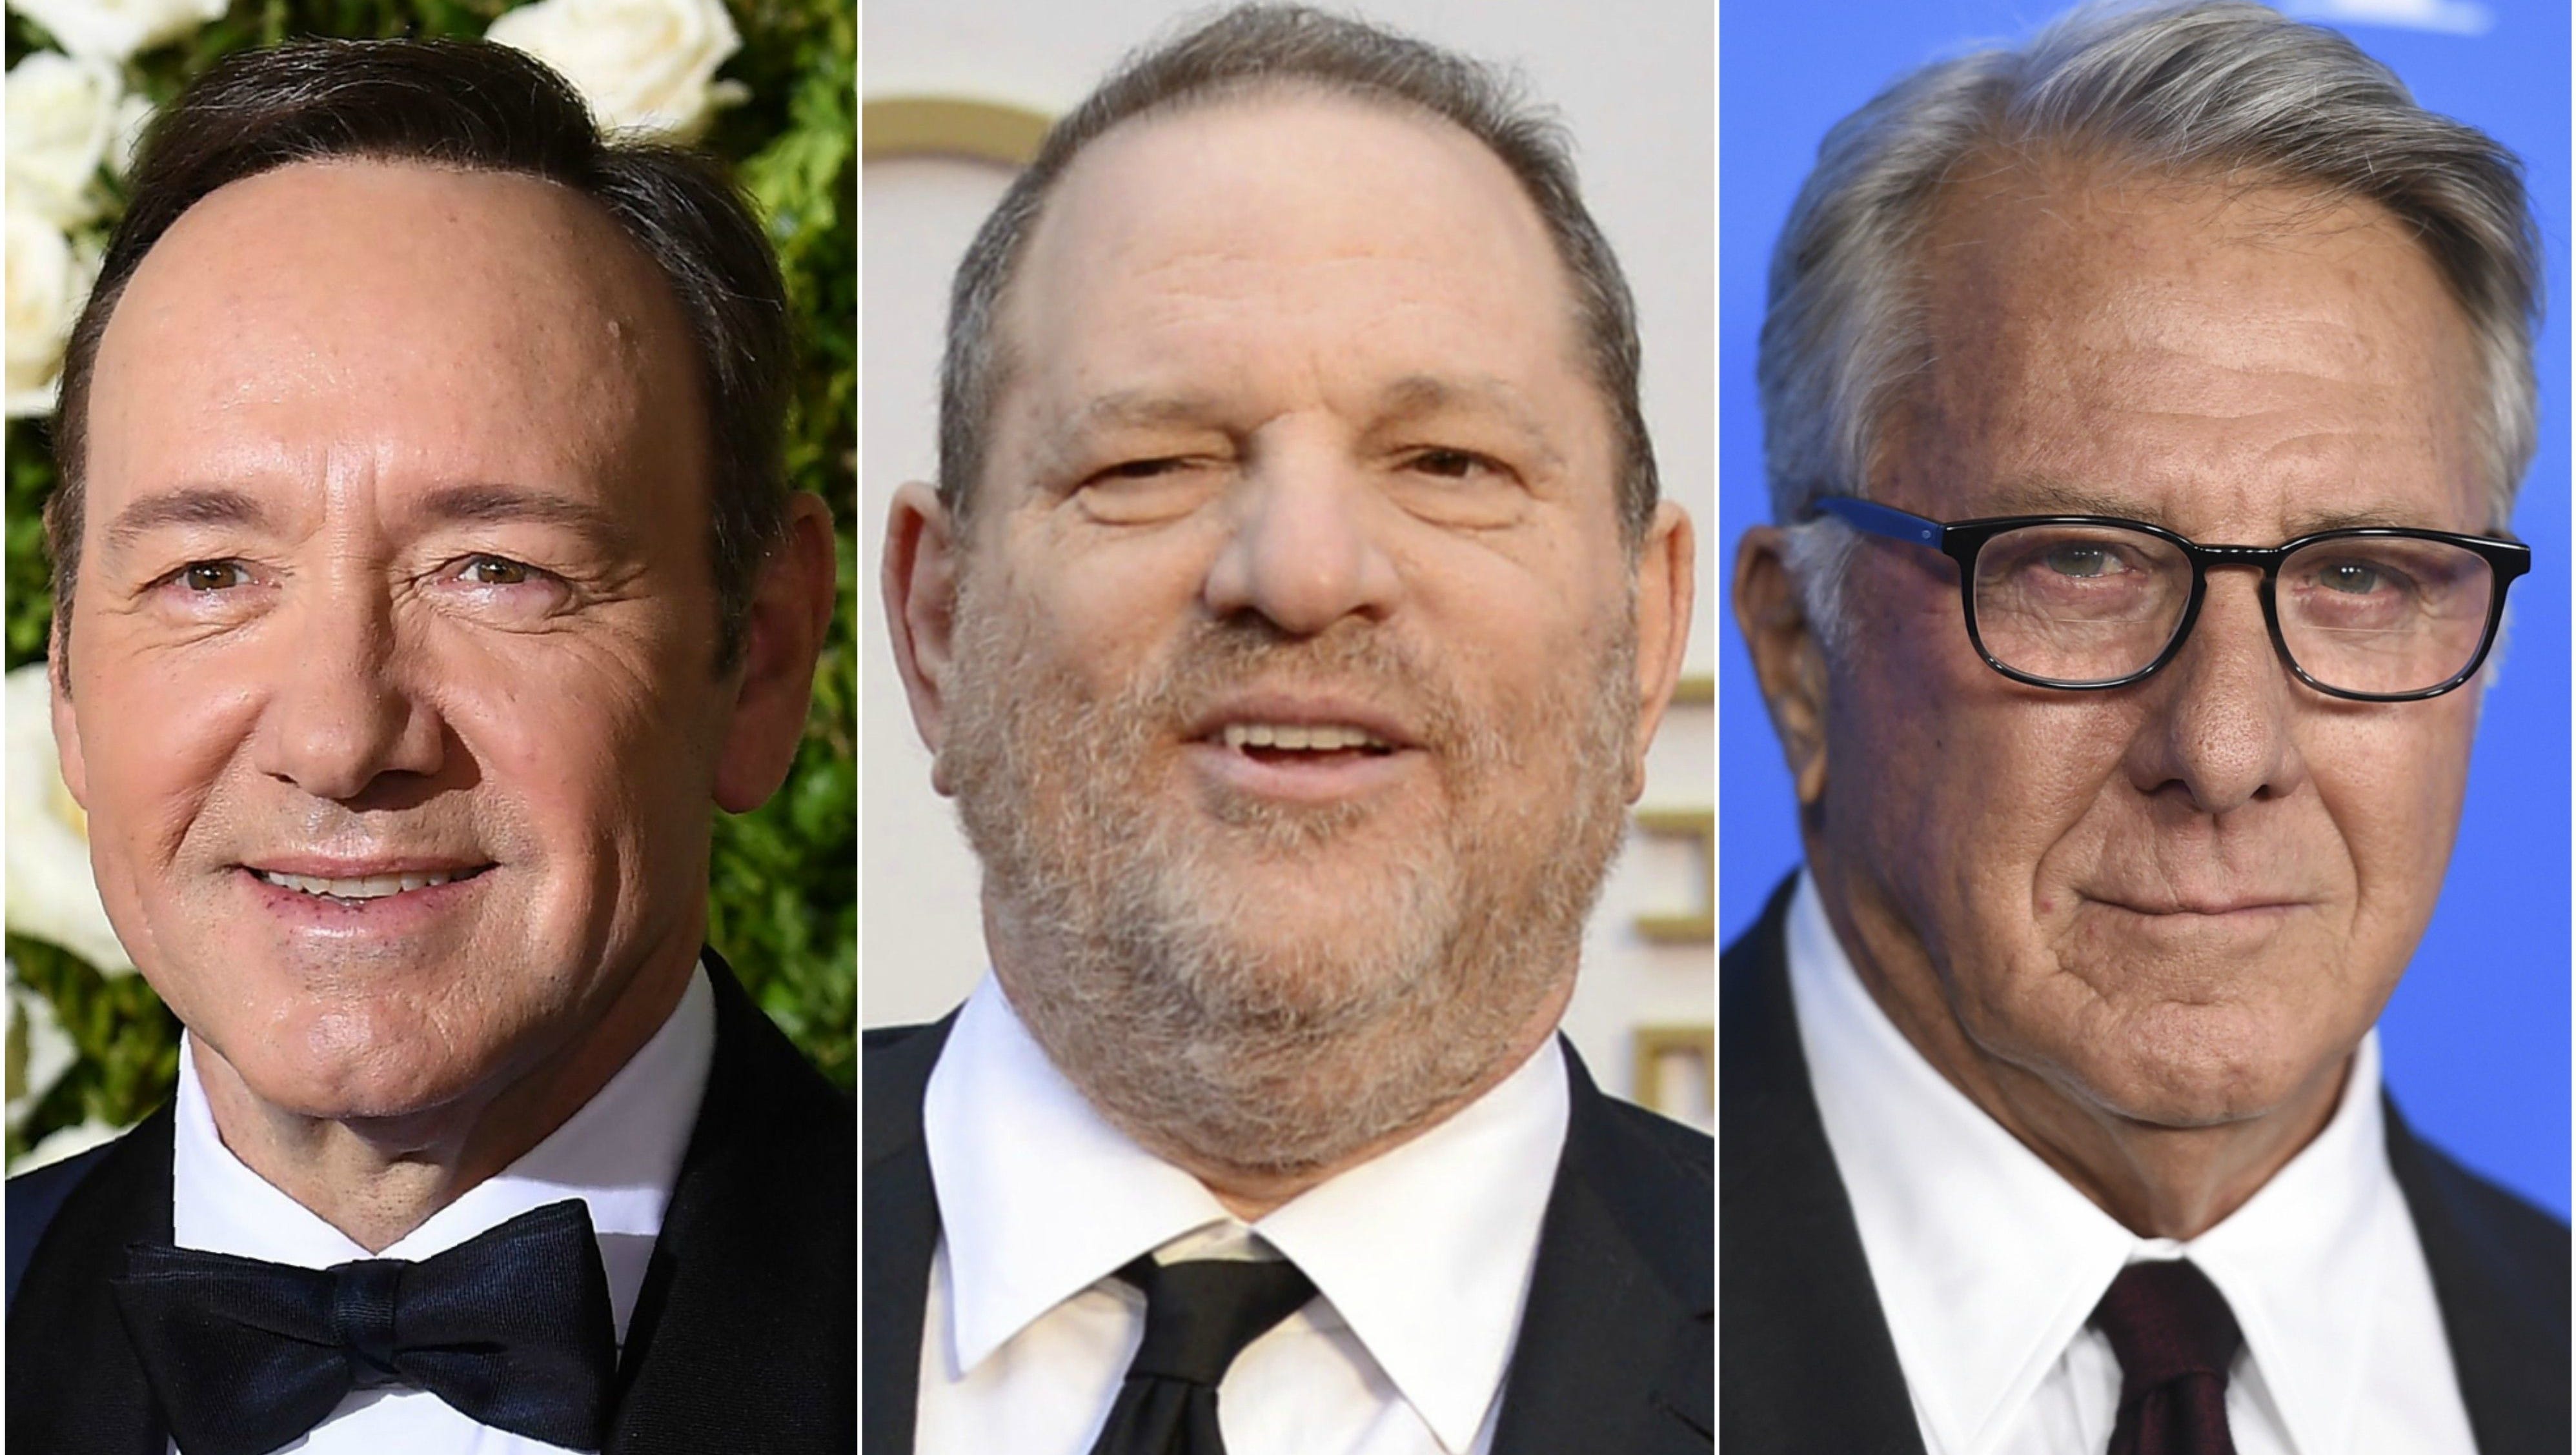 Hollywood Power Players Who Are Accused Of Sexual Assault Harassment